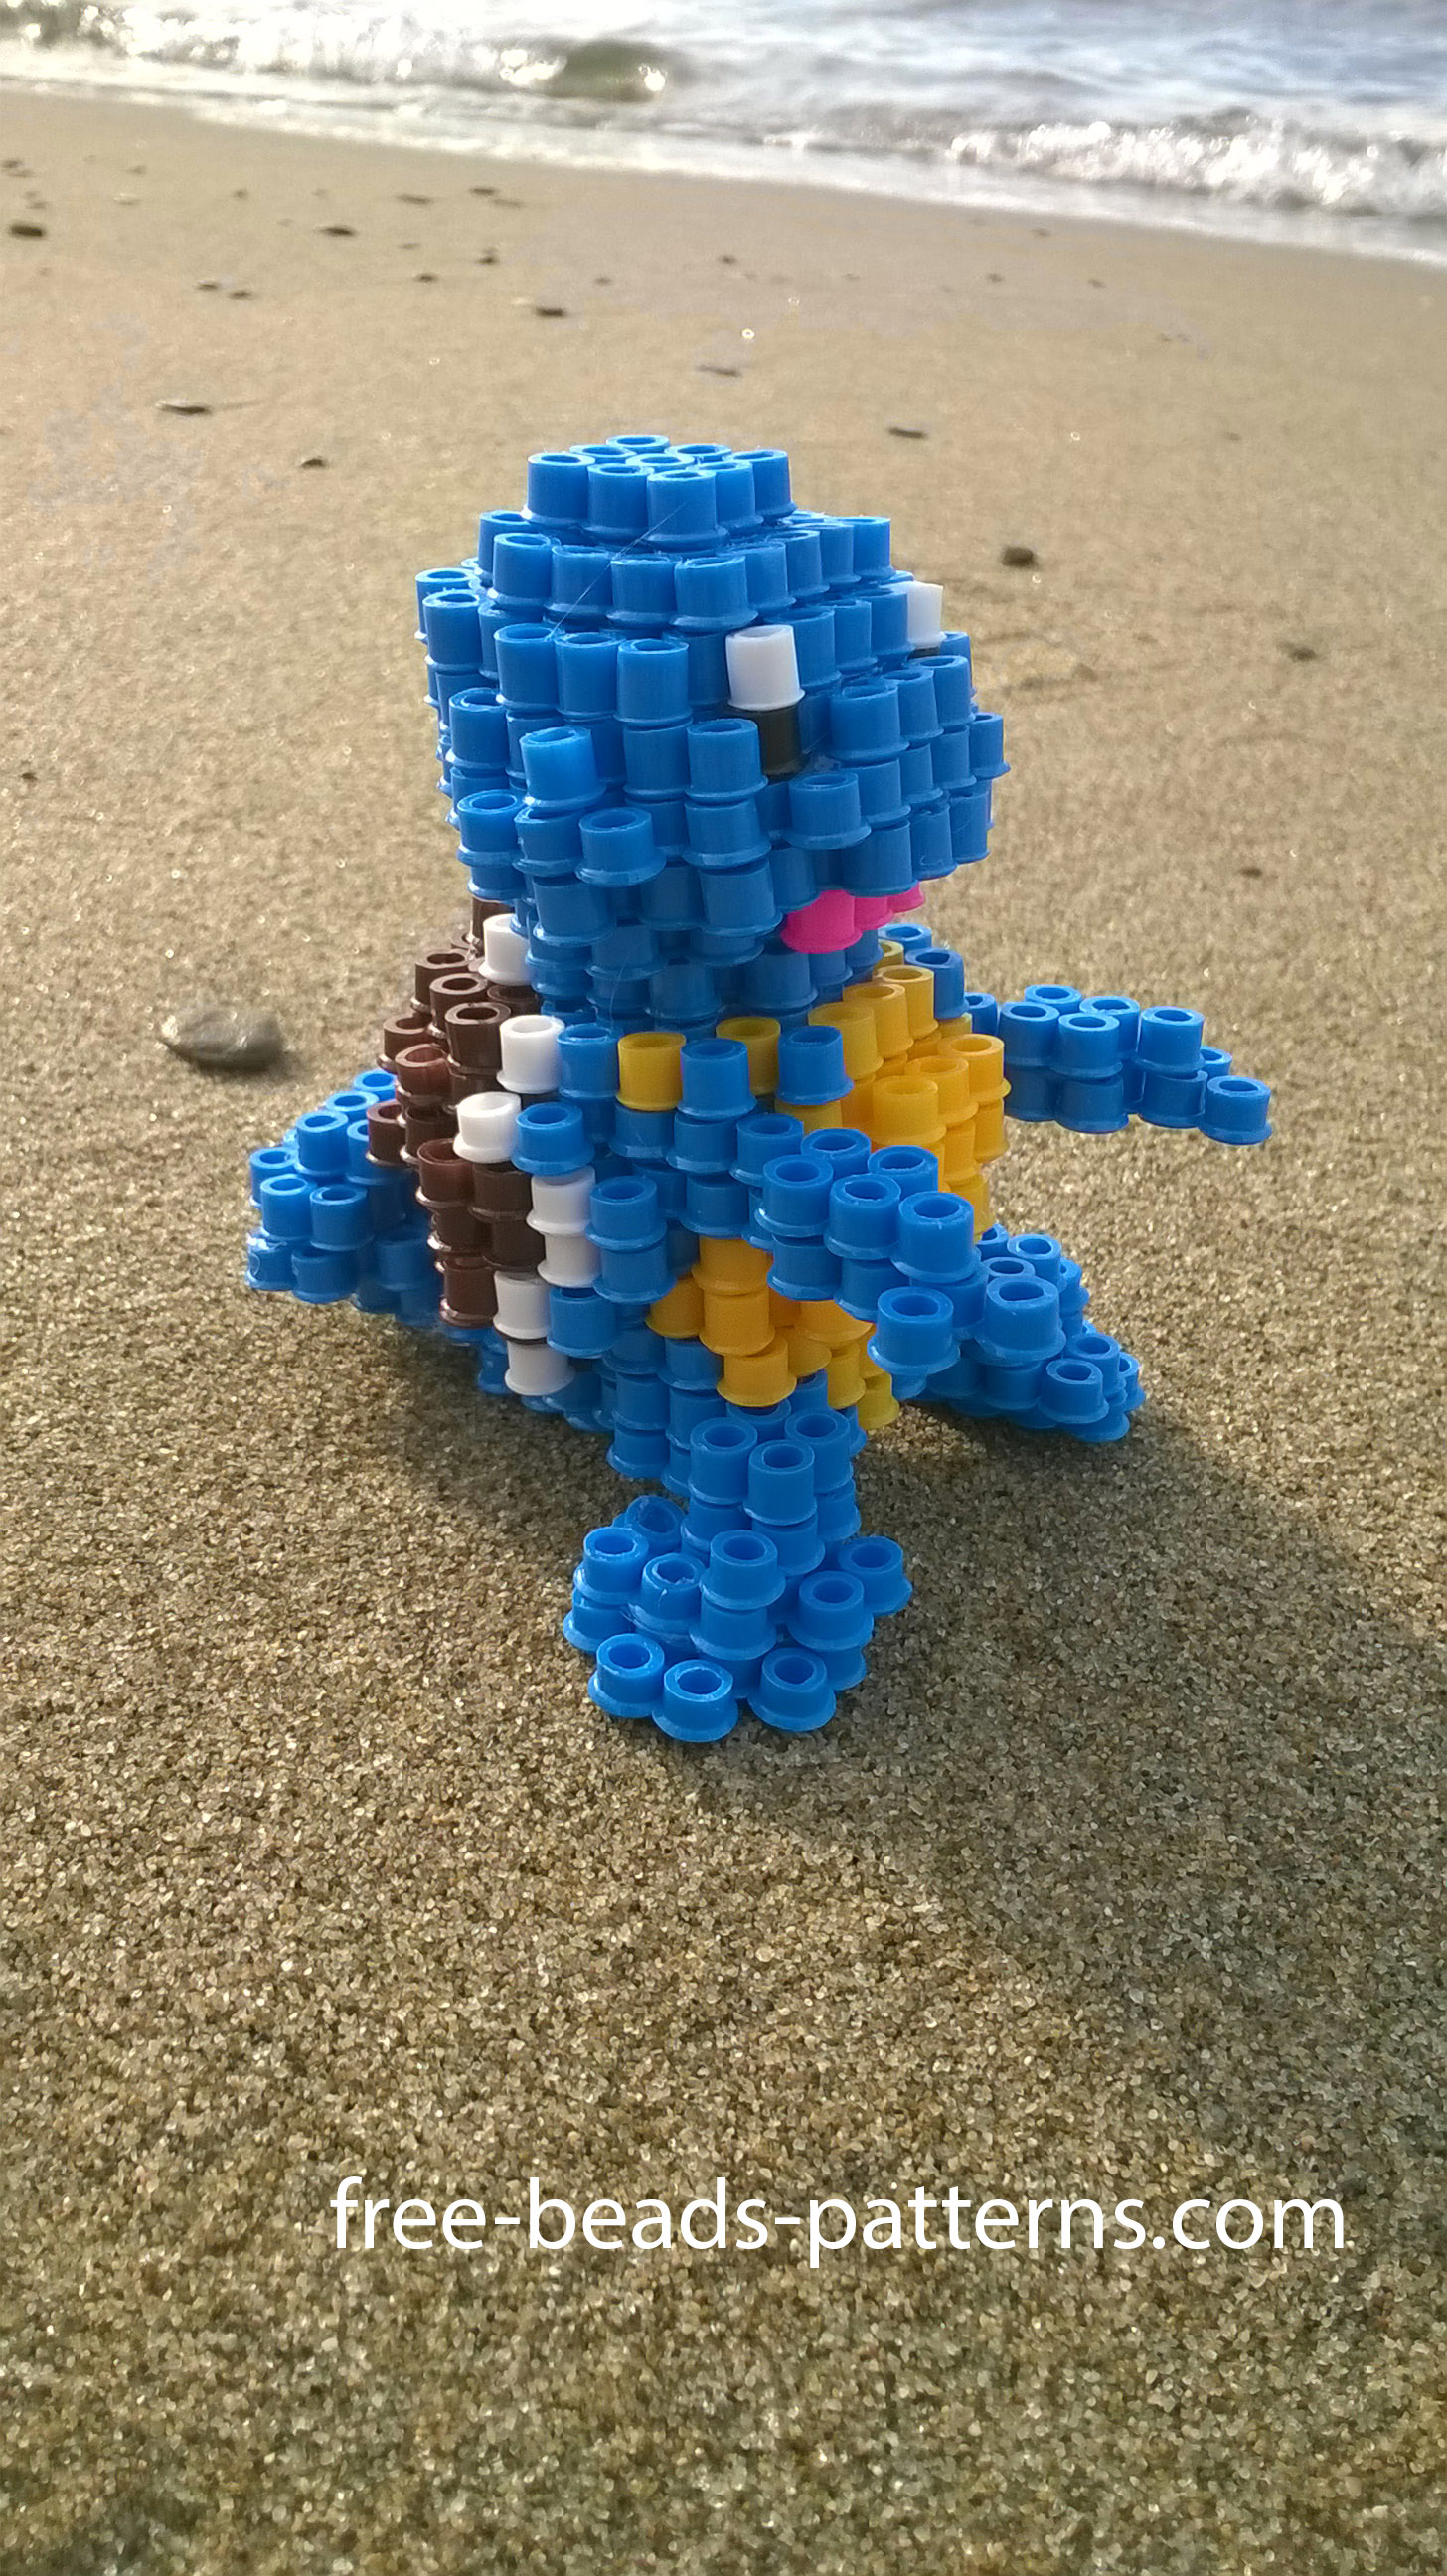 Squirtle Pokemon 3D Perler Beads Hama Beads at the beach photos (7)